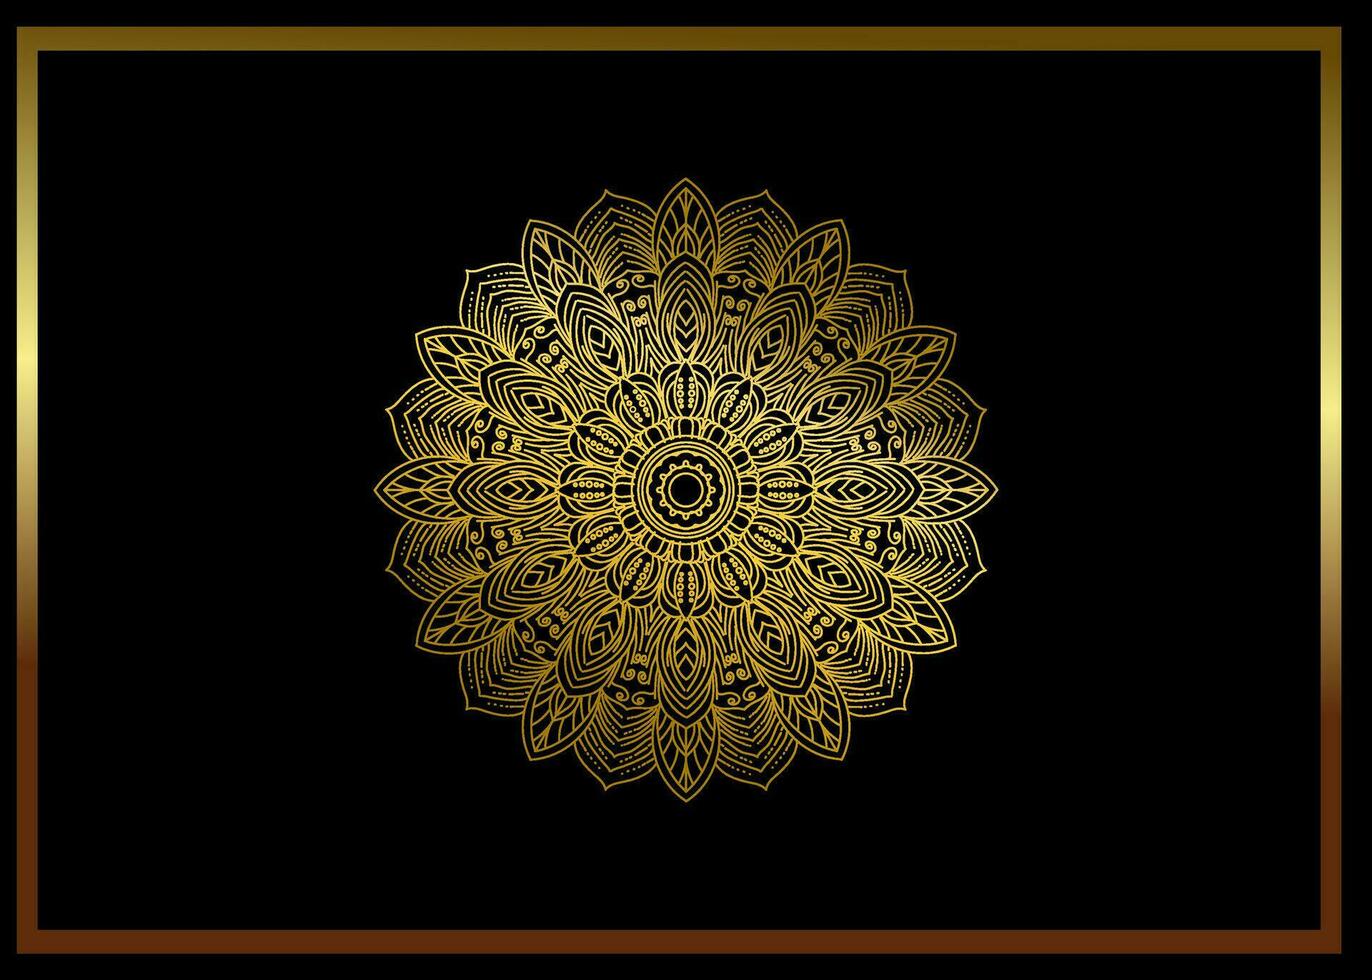 Black luxury background with gold mandala ornament vector